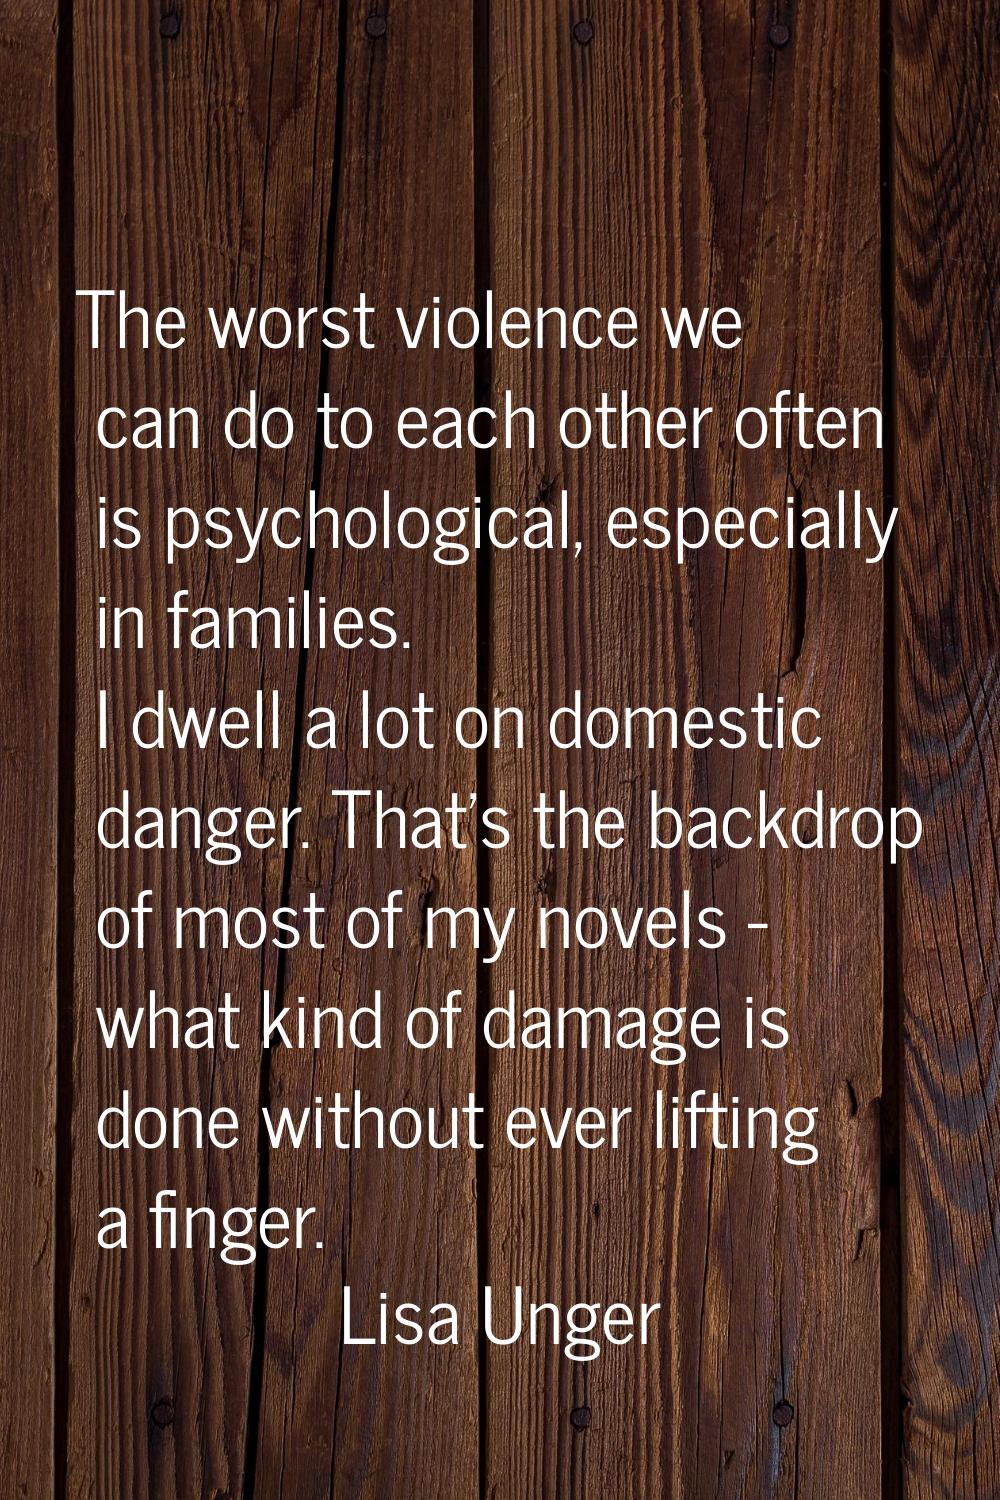 The worst violence we can do to each other often is psychological, especially in families. I dwell 